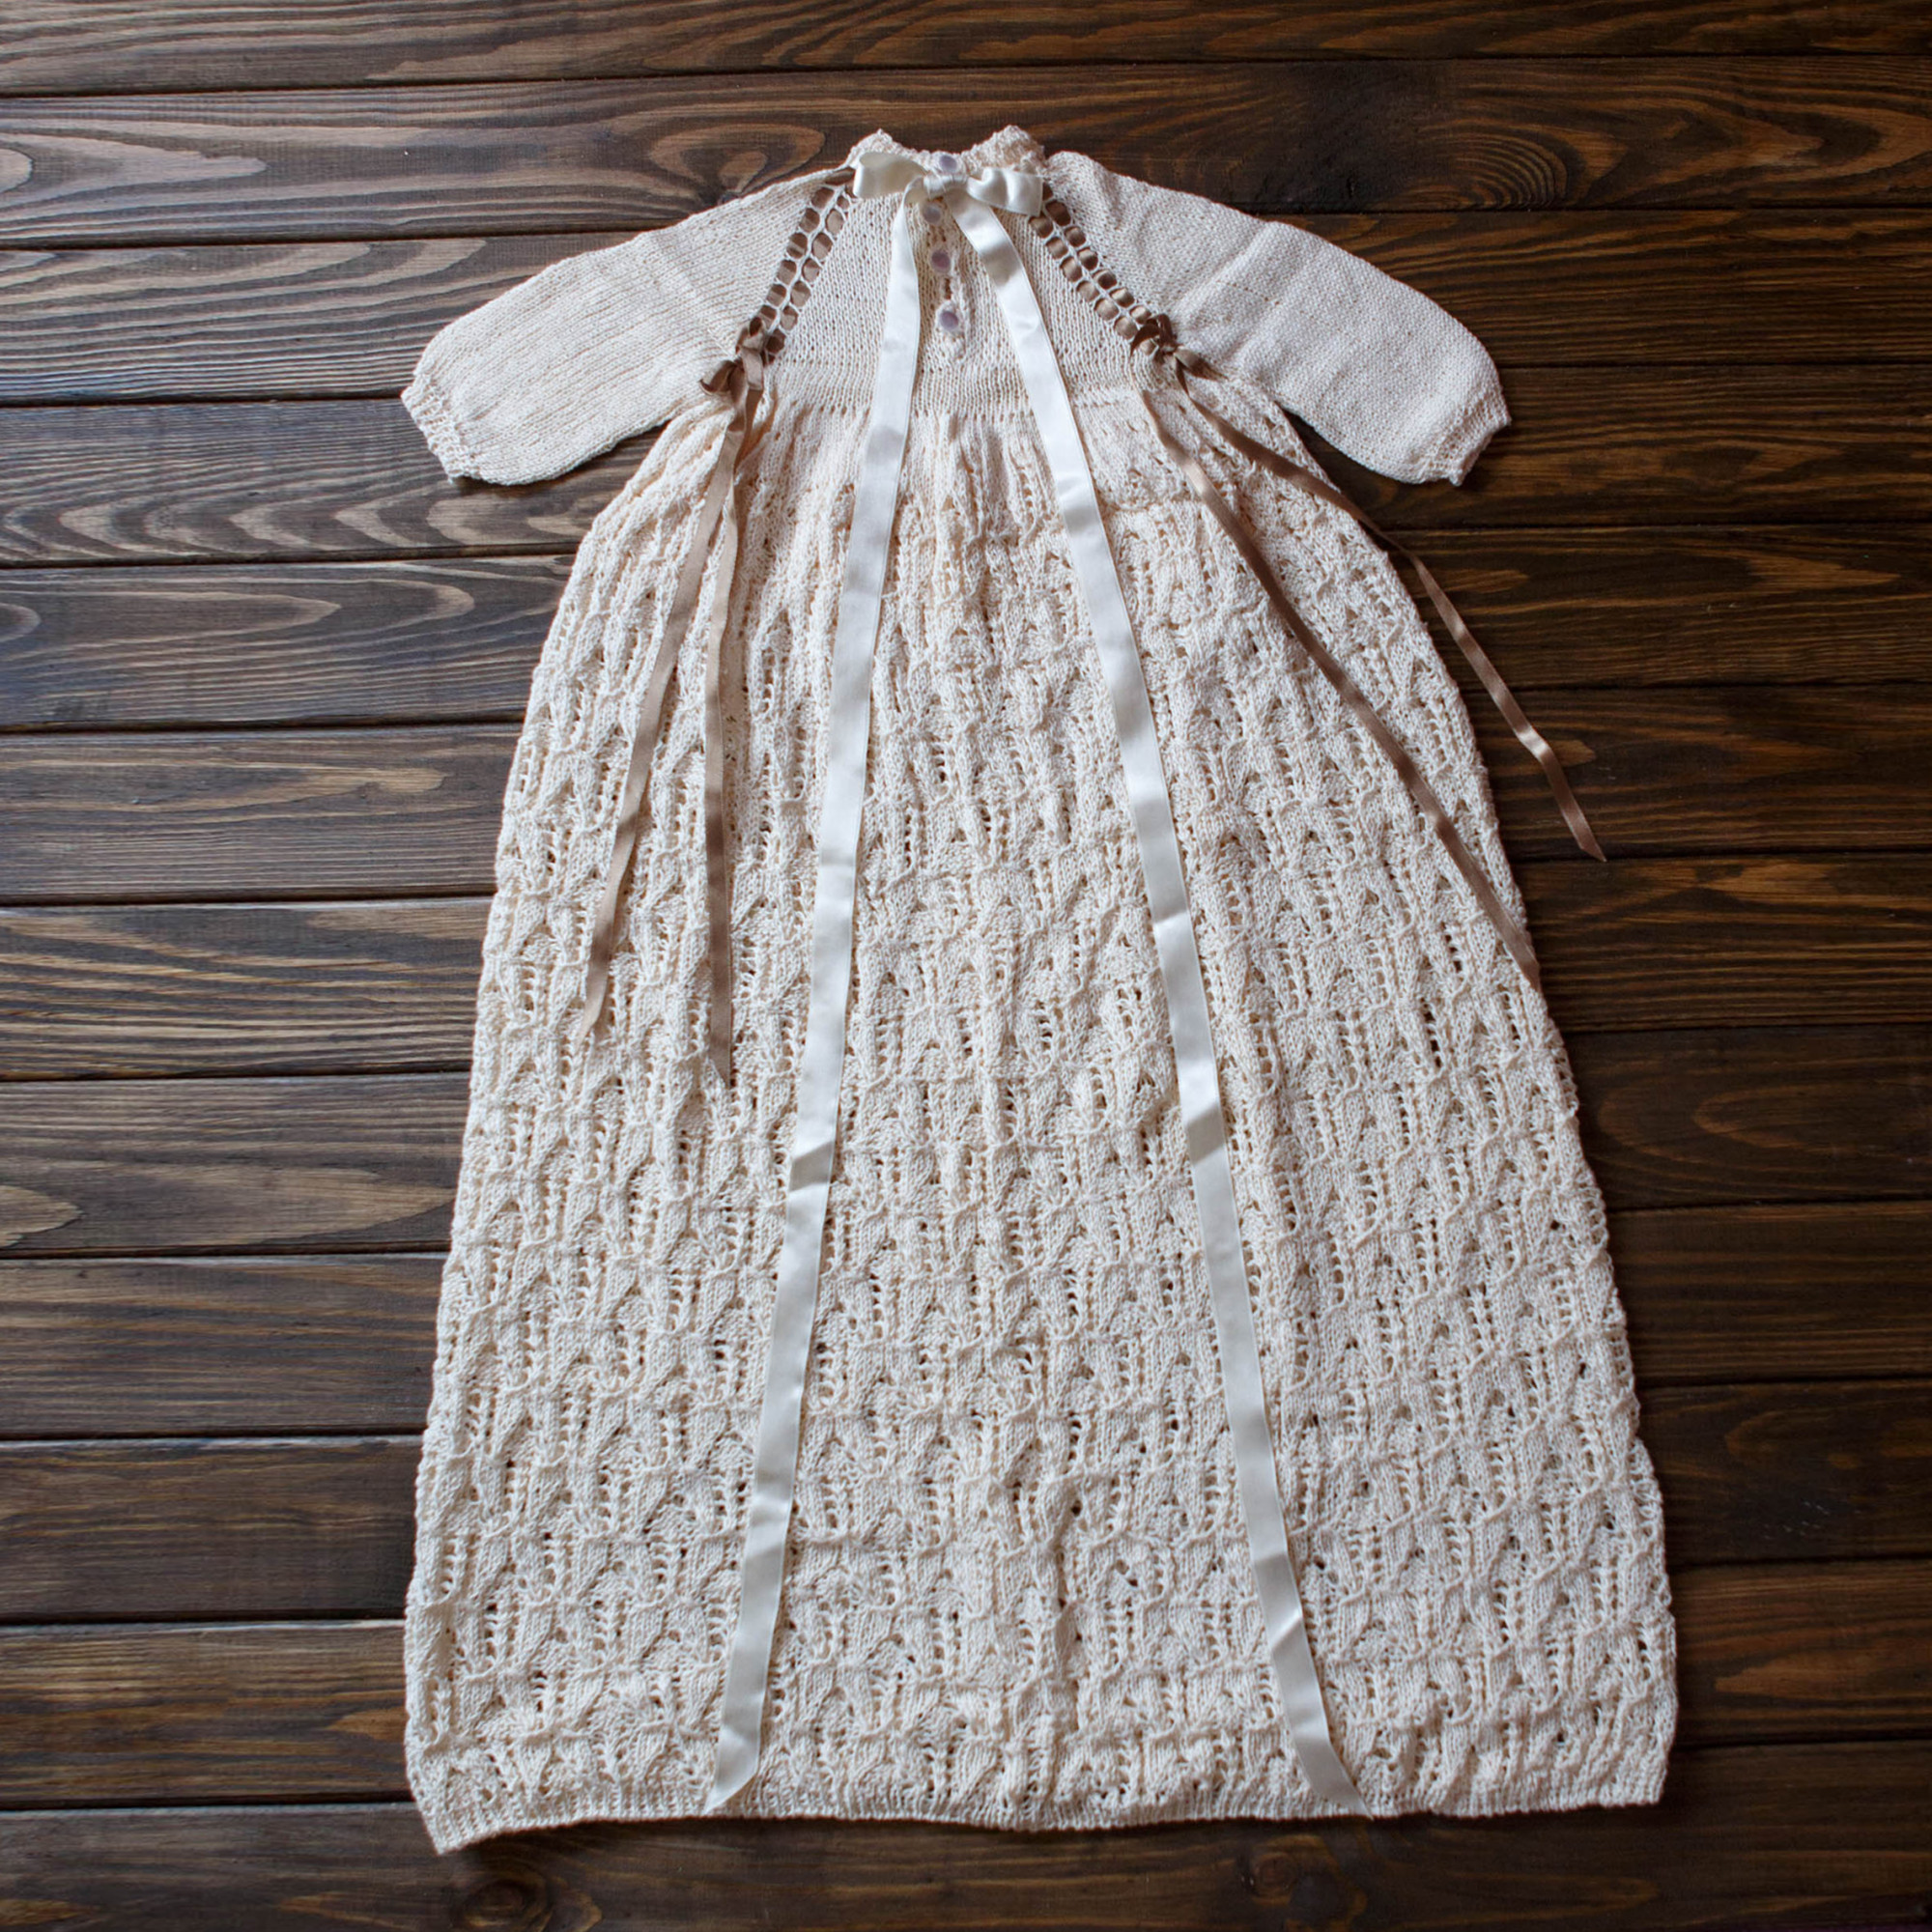 Hand knitted Loosely Knit Christening Dress, Baby boy, 7 months